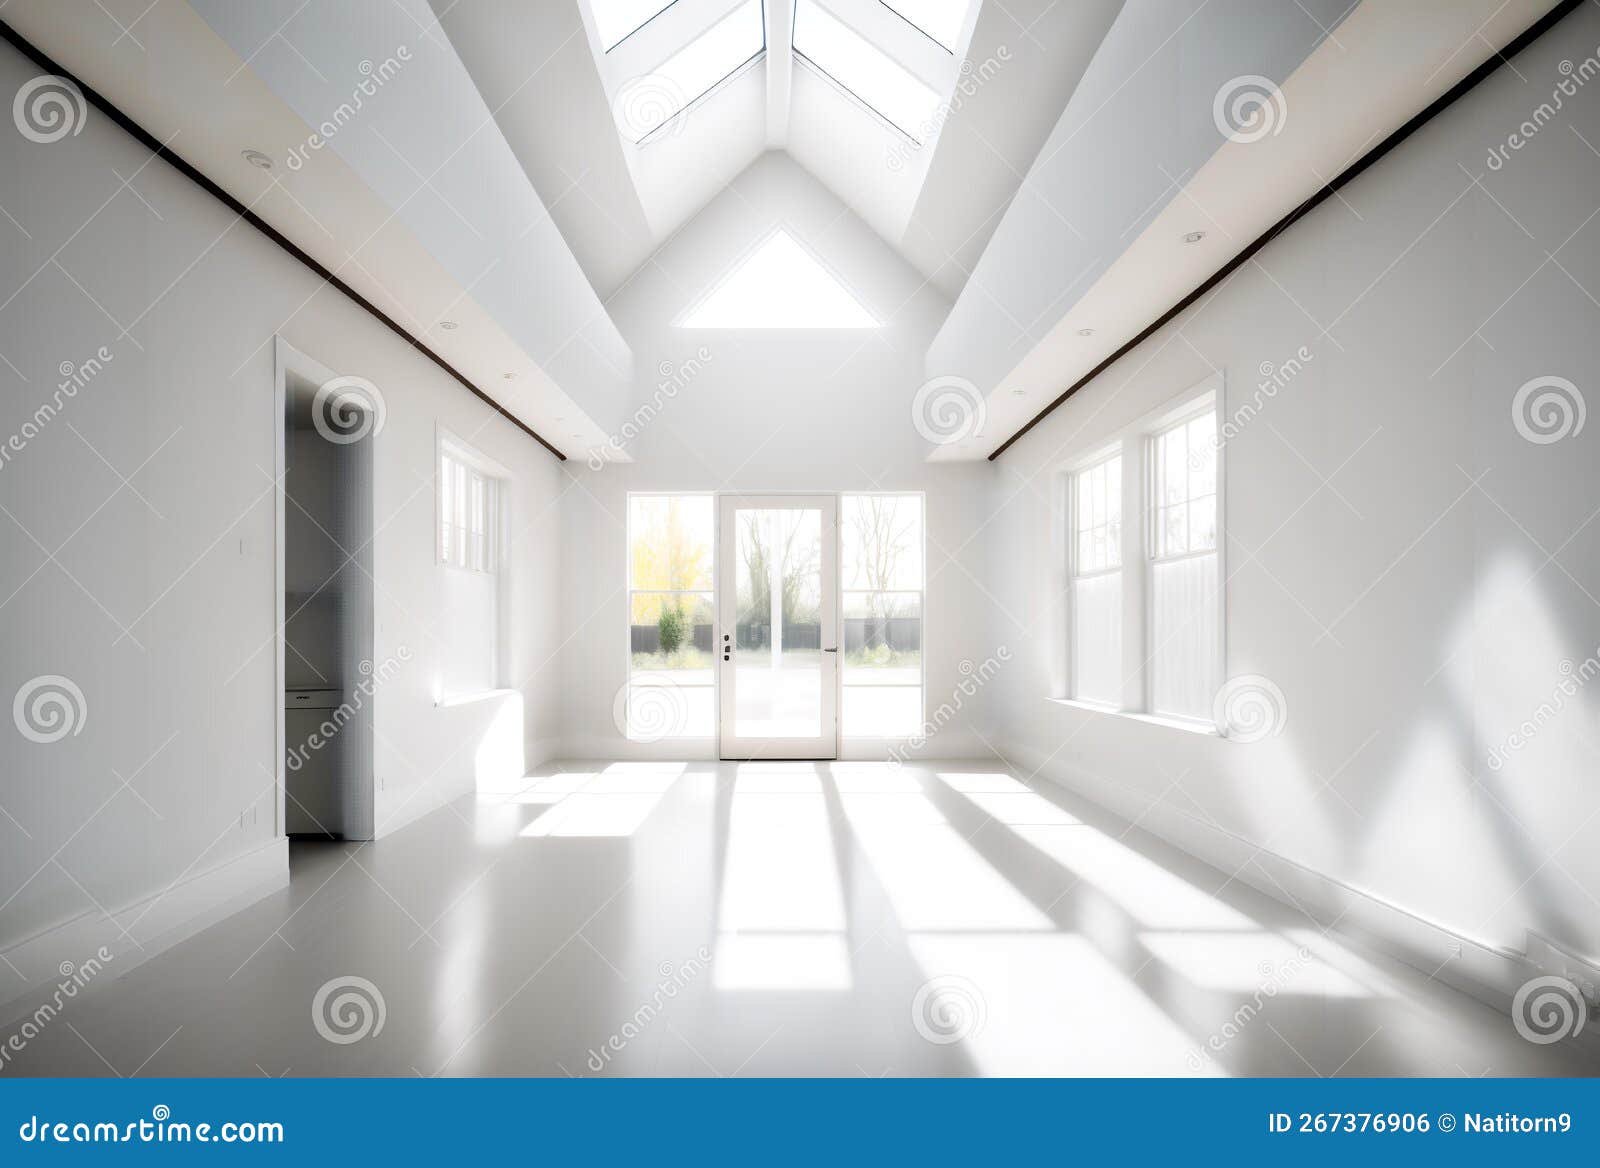 low-angle shot of an empty yoga studio with a large skylight overhead (aigen)